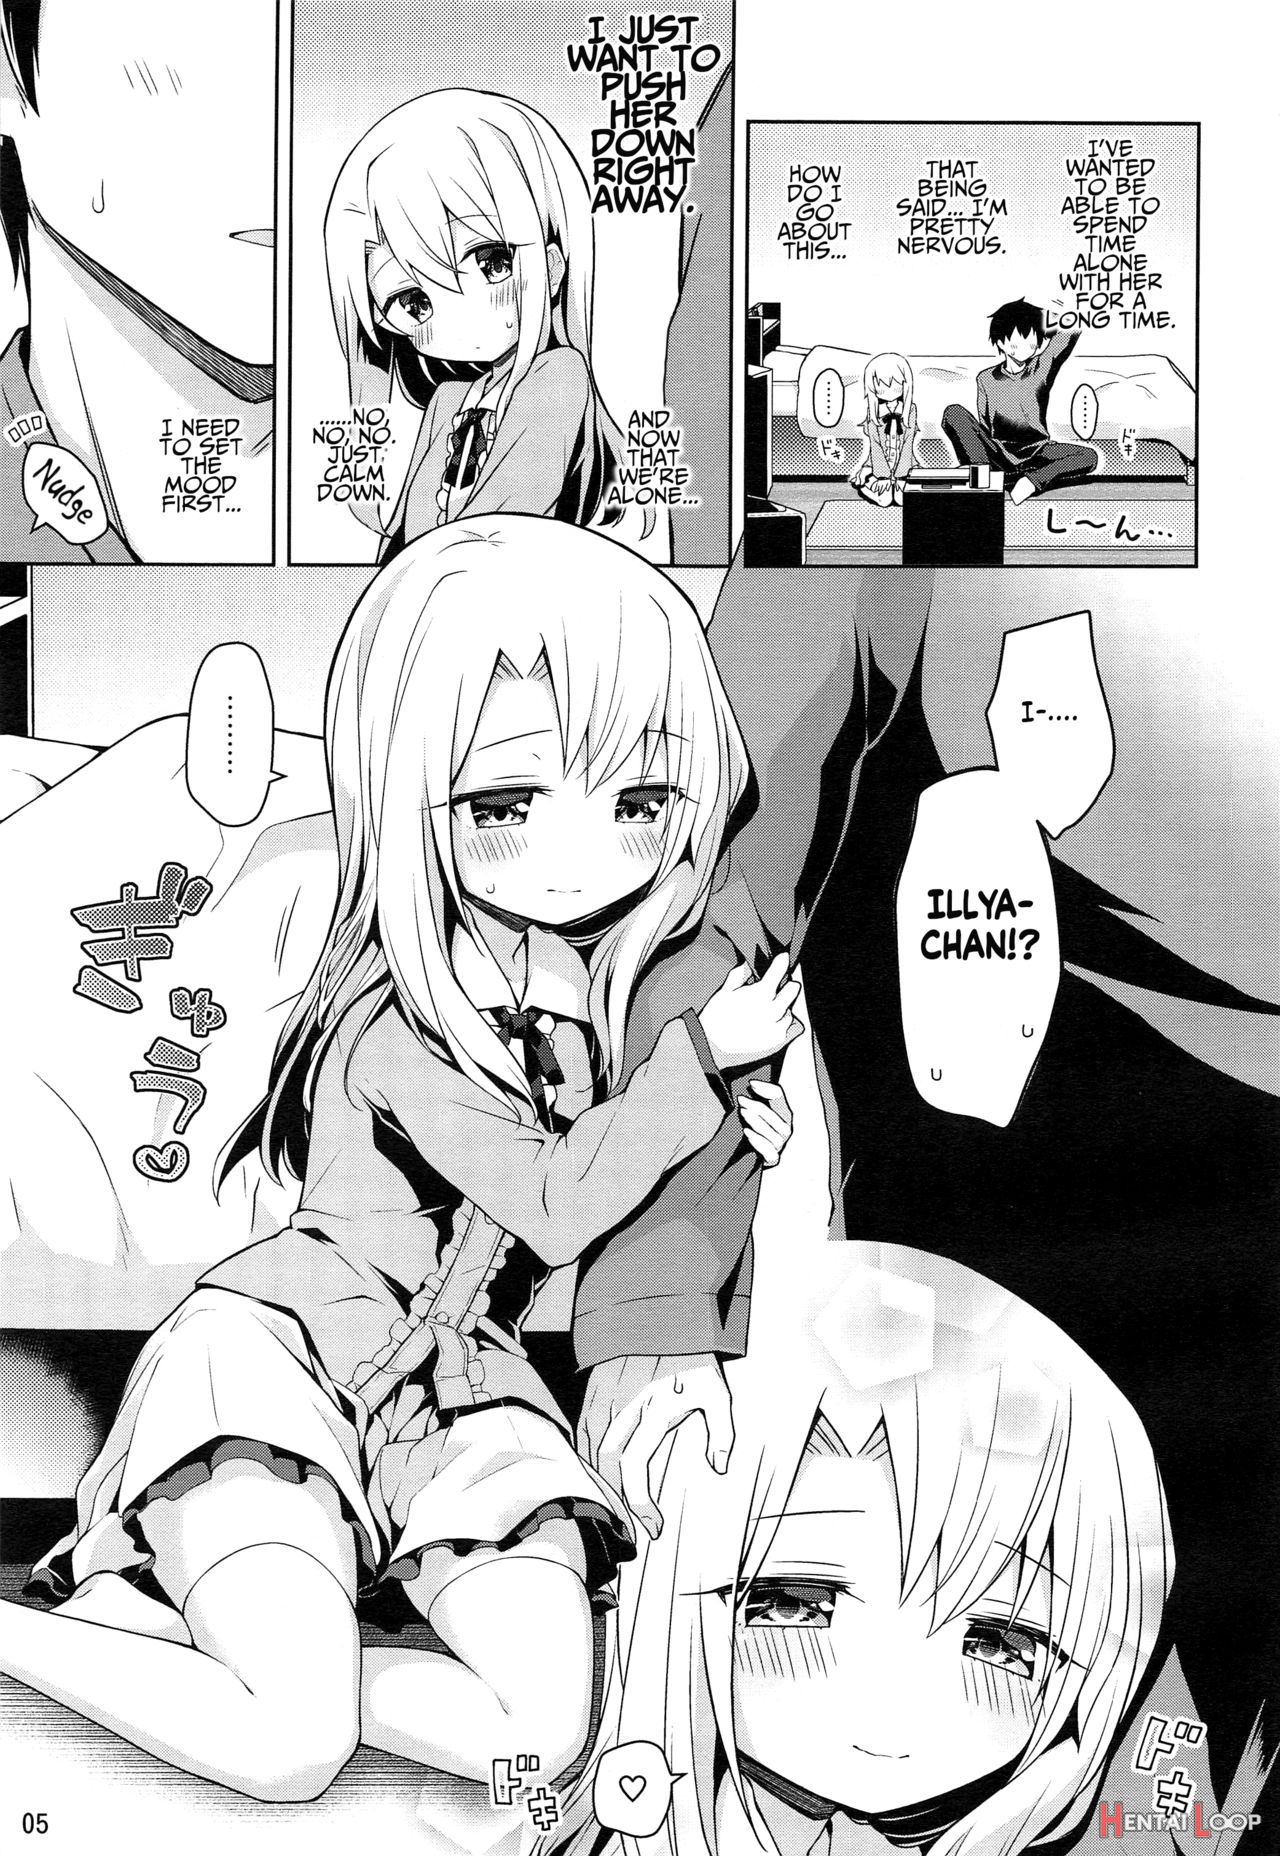 I Want To Have Sex With Illya At Home!! page 6